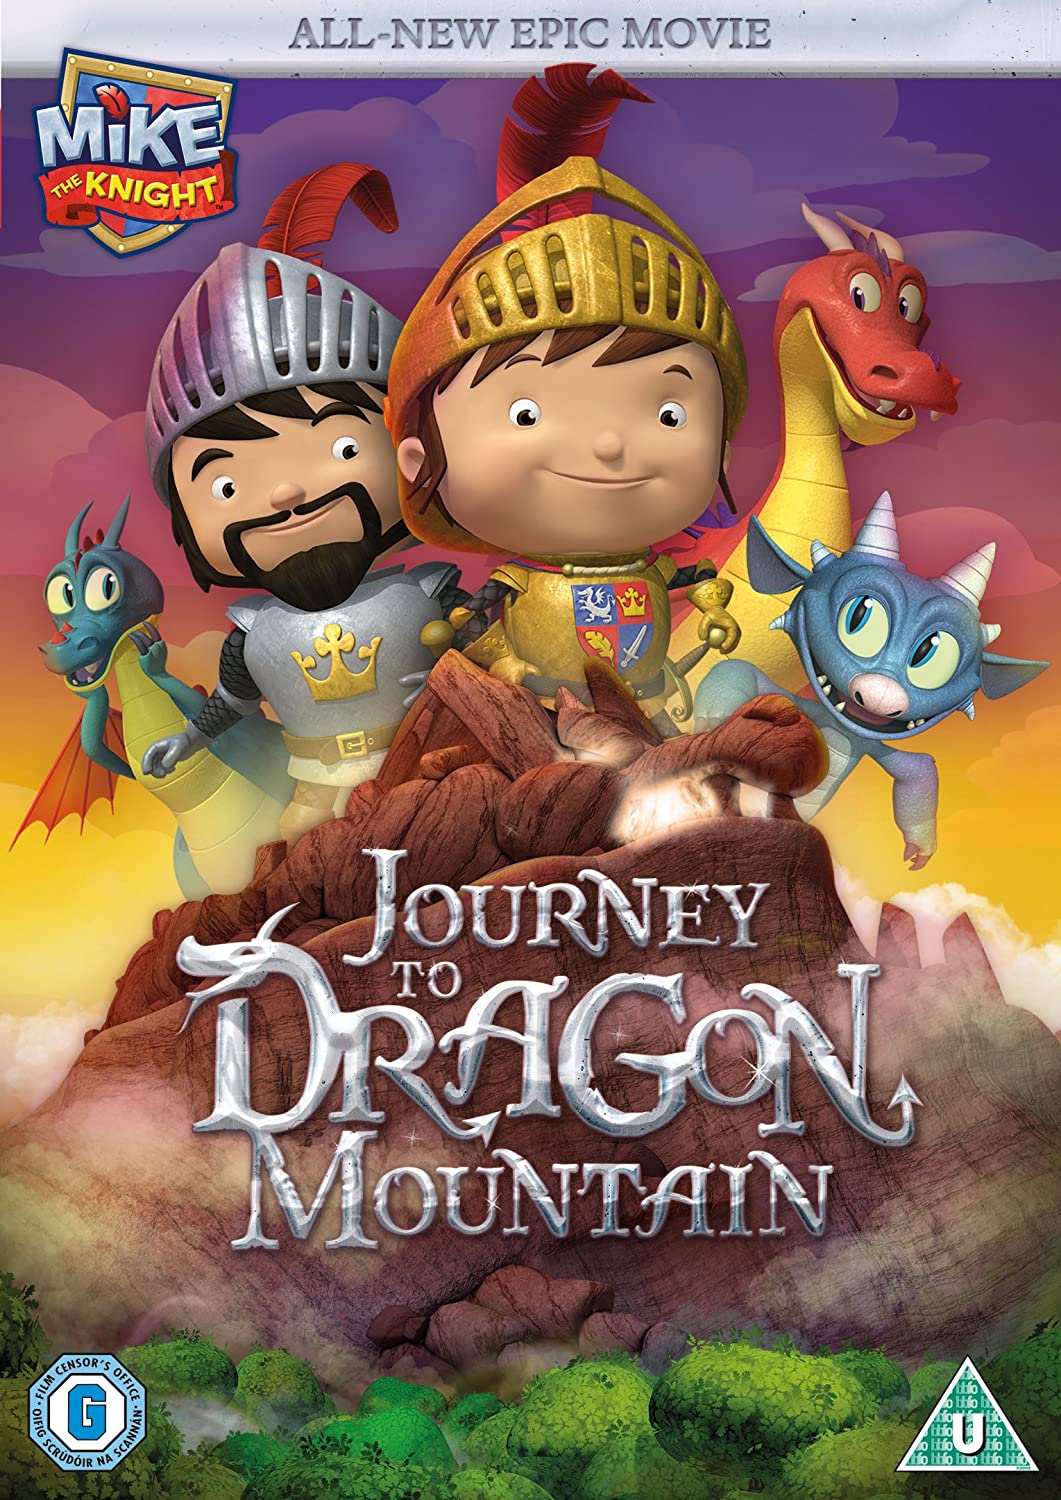 Mike The Knight: Journey to Dragon Mountain [2017] - Animated [DVD]